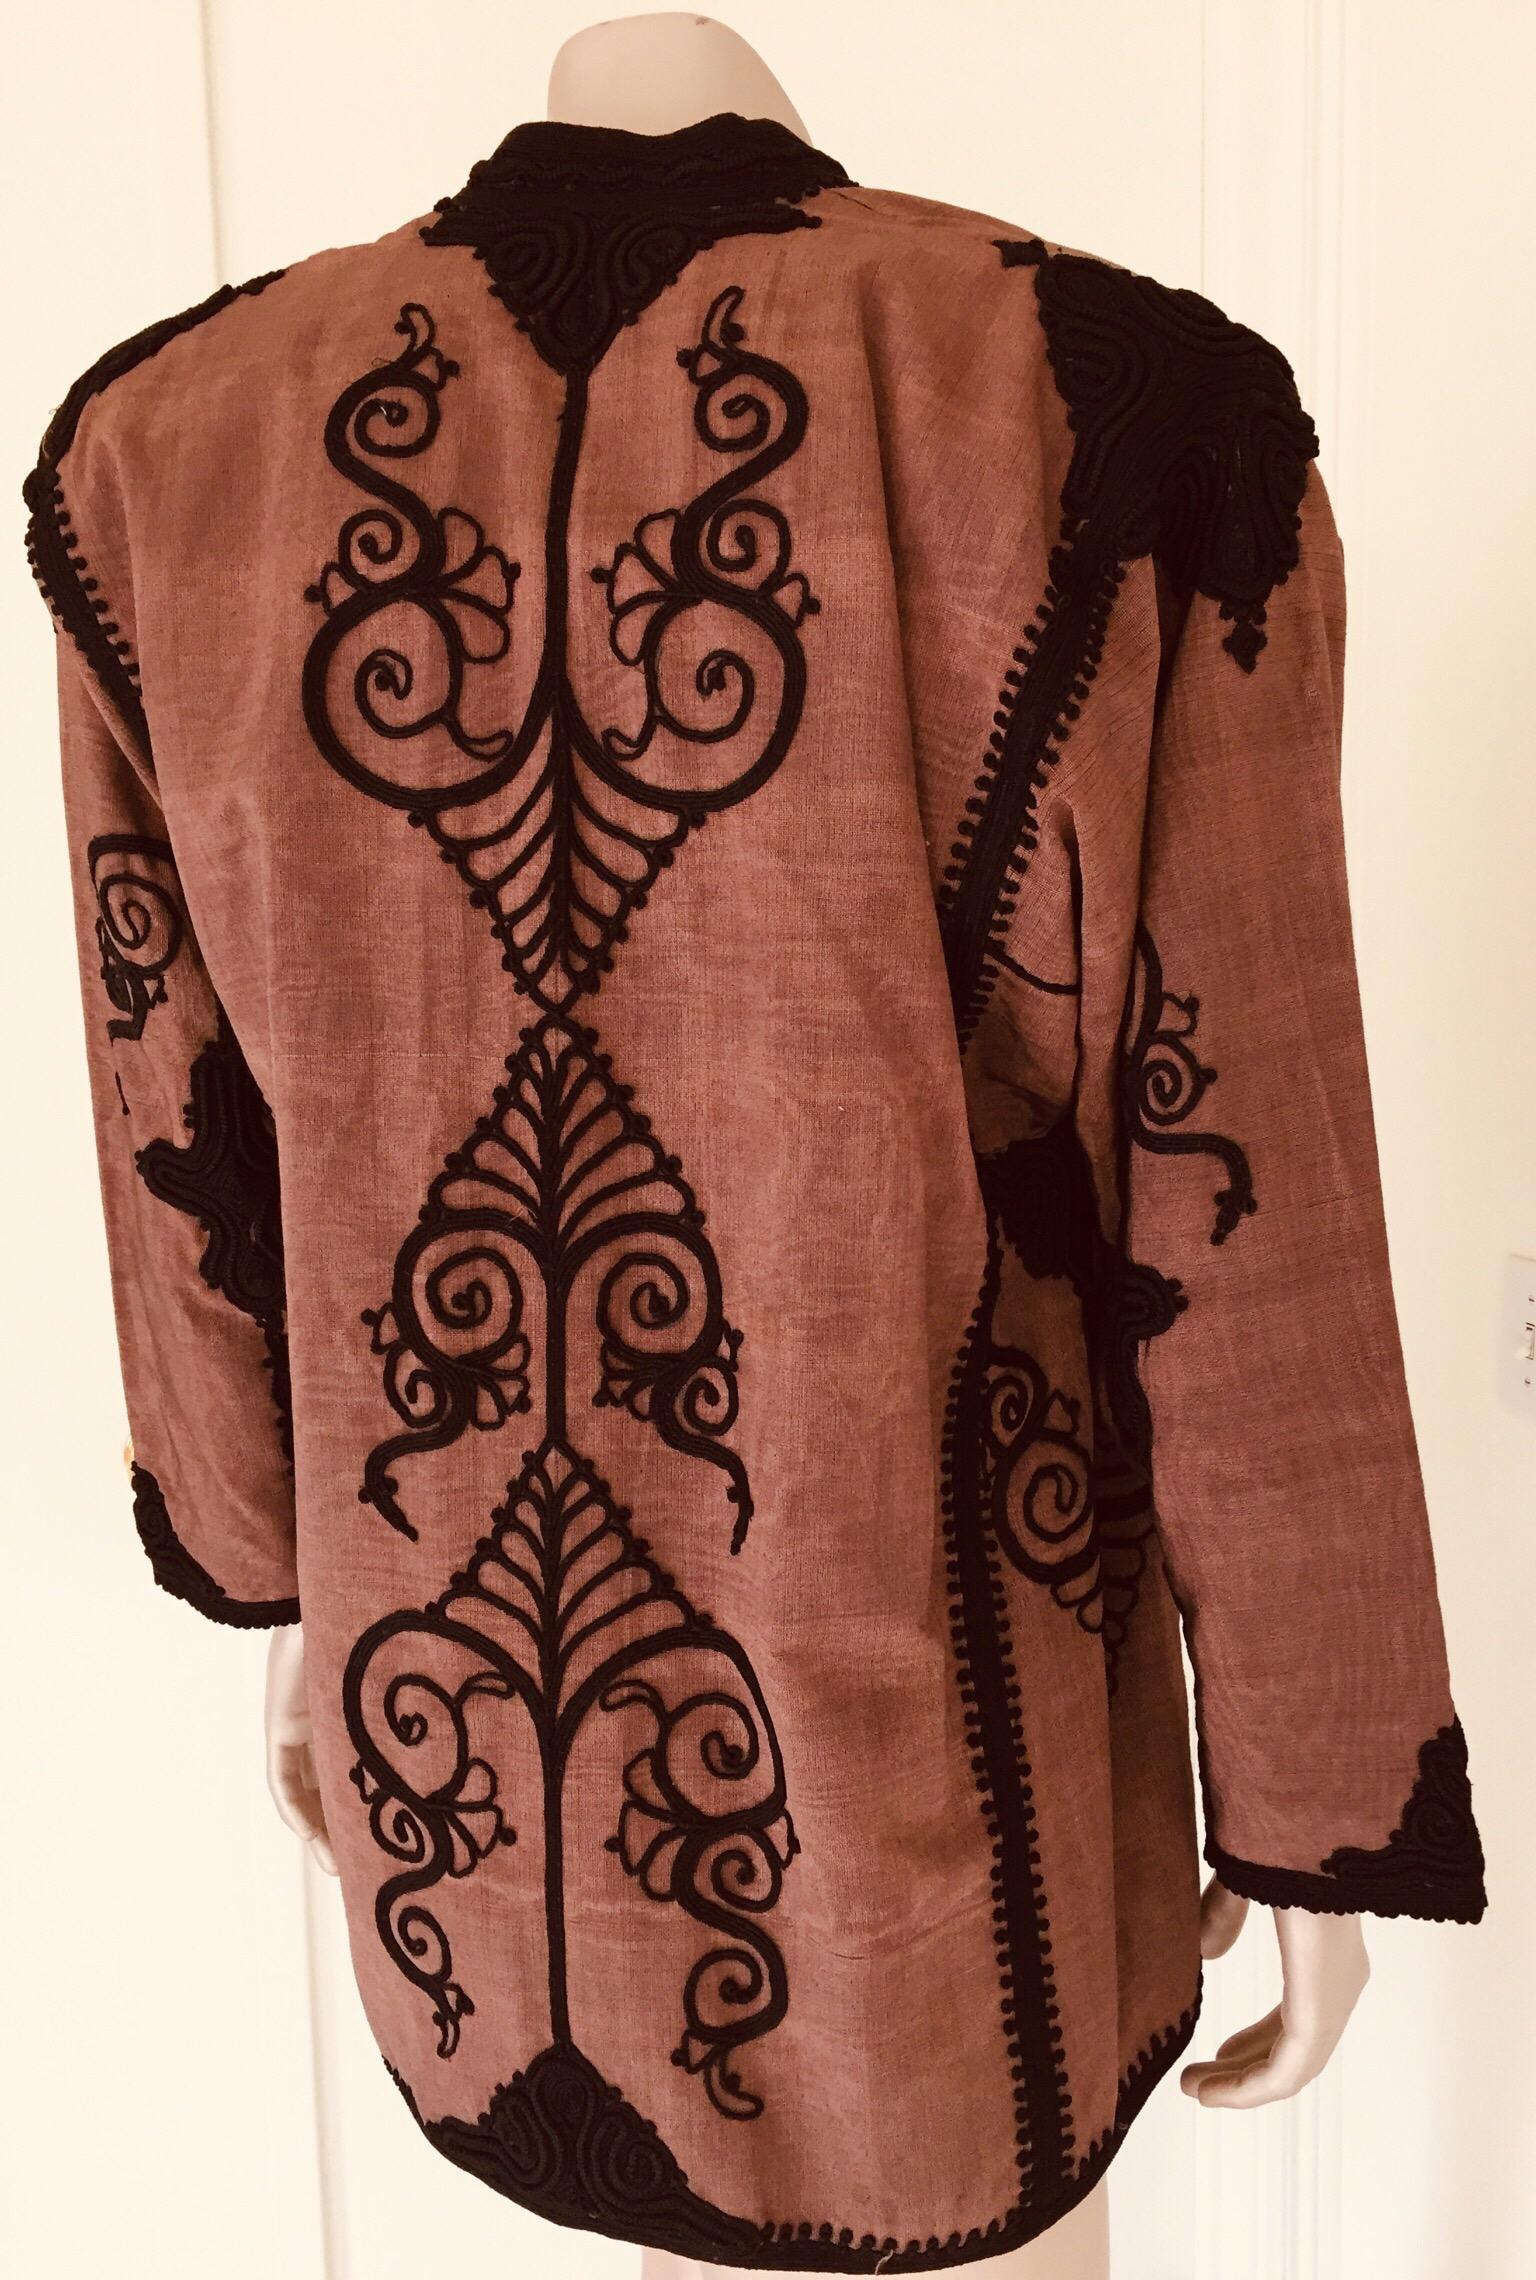 Moroccan Short Vest Brown and Black Embroideries Caftan 1